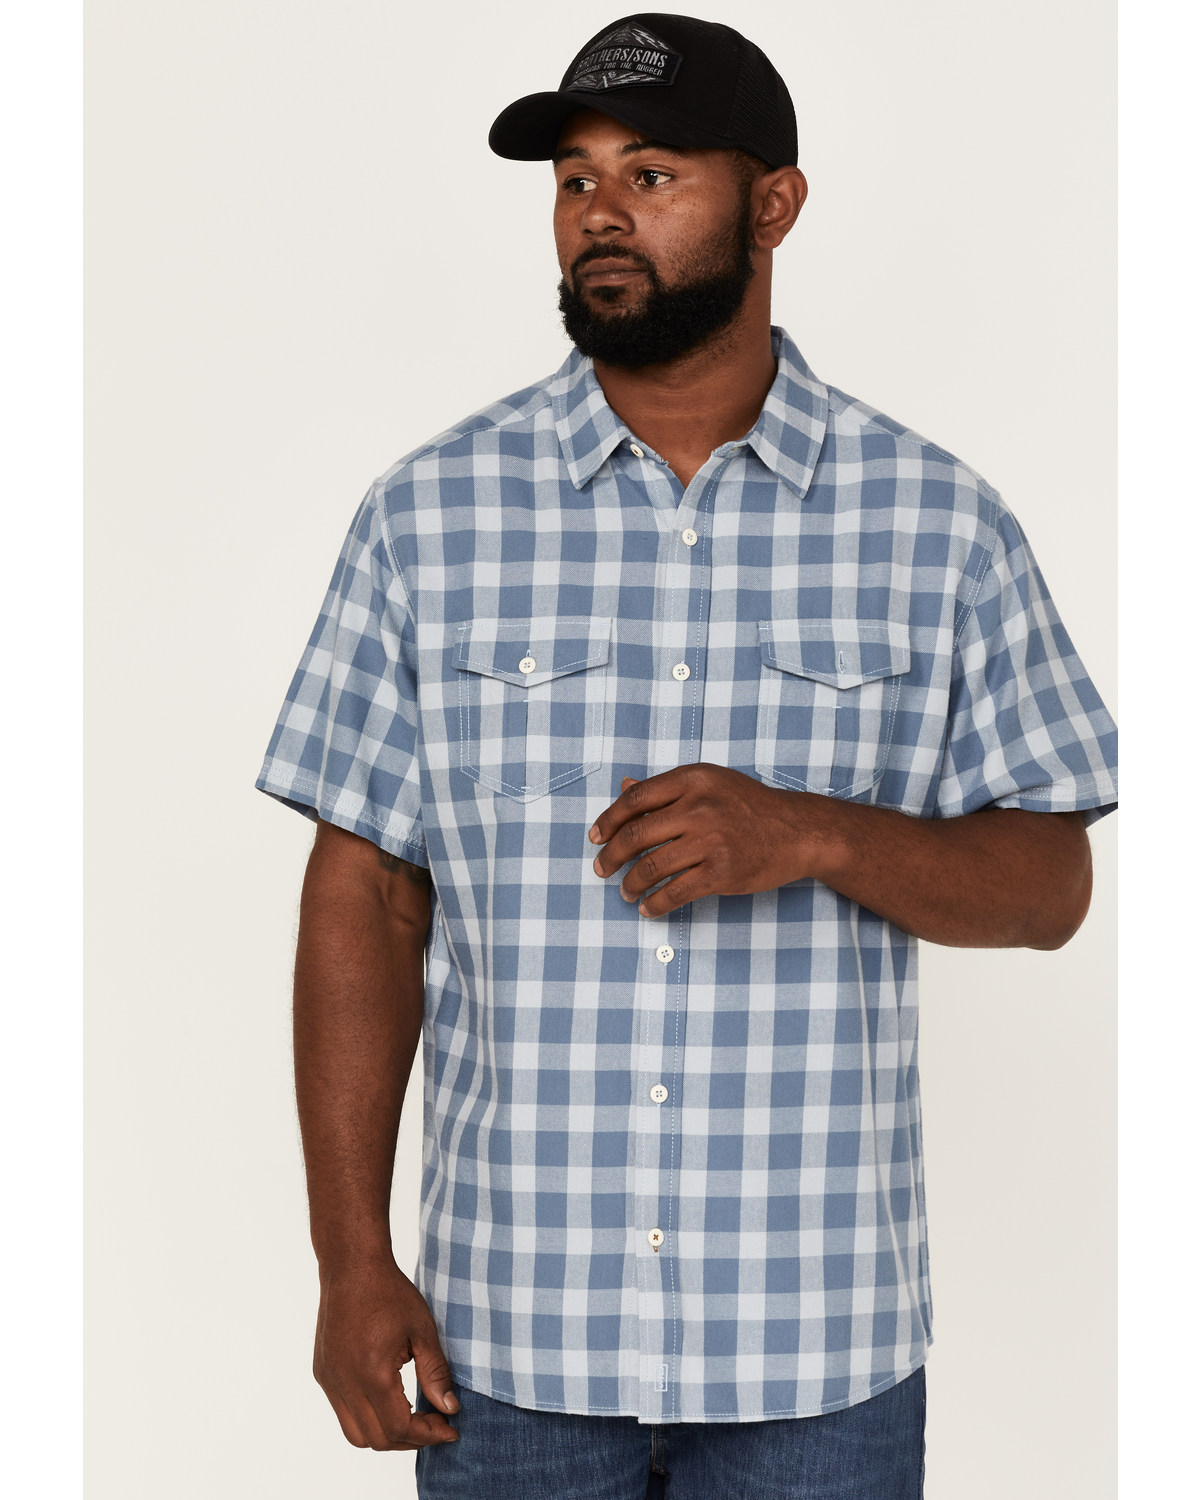 Brothers and Sons Men's Buffalo Check Plaid Short Sleeve Button Down Western Shirt